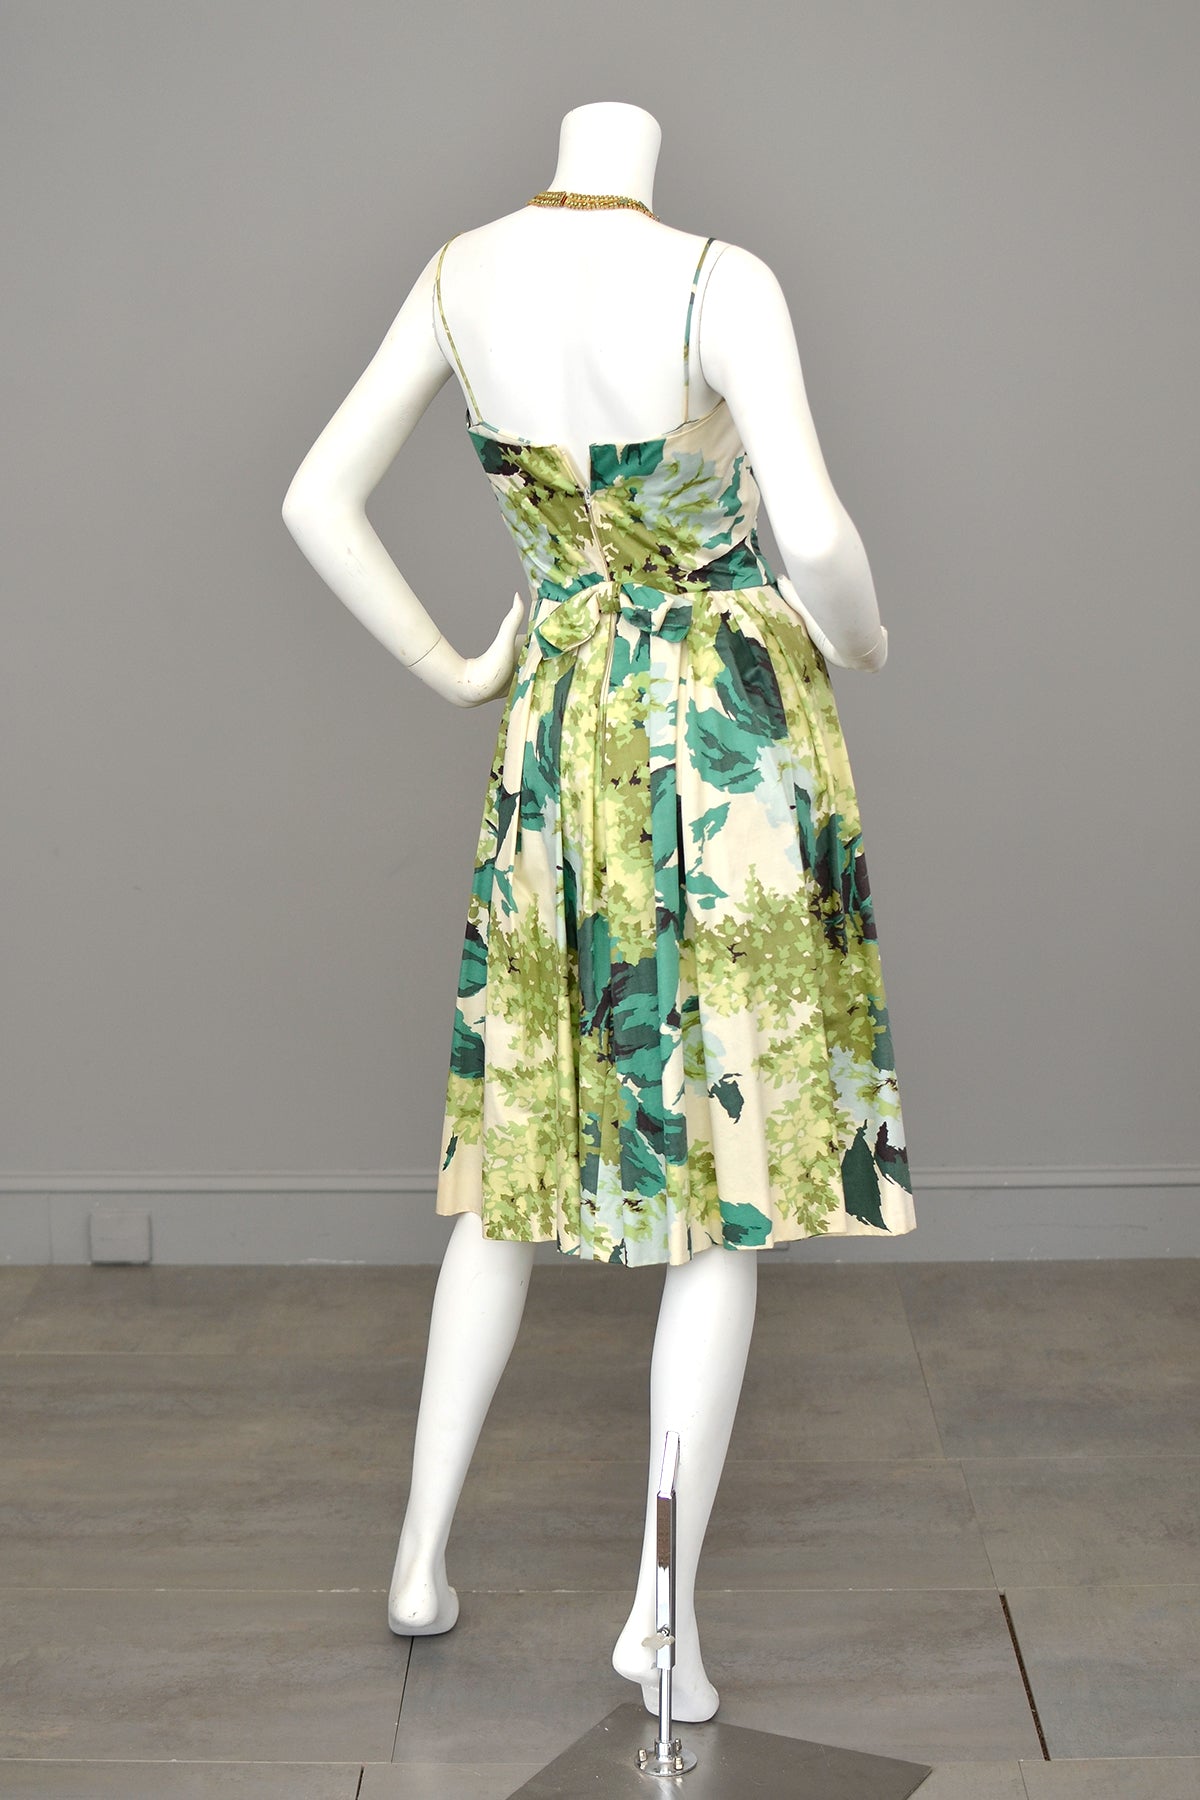 1950s 60s Water Color Hydrangea Floral Print Party Dress with Draped Bodice